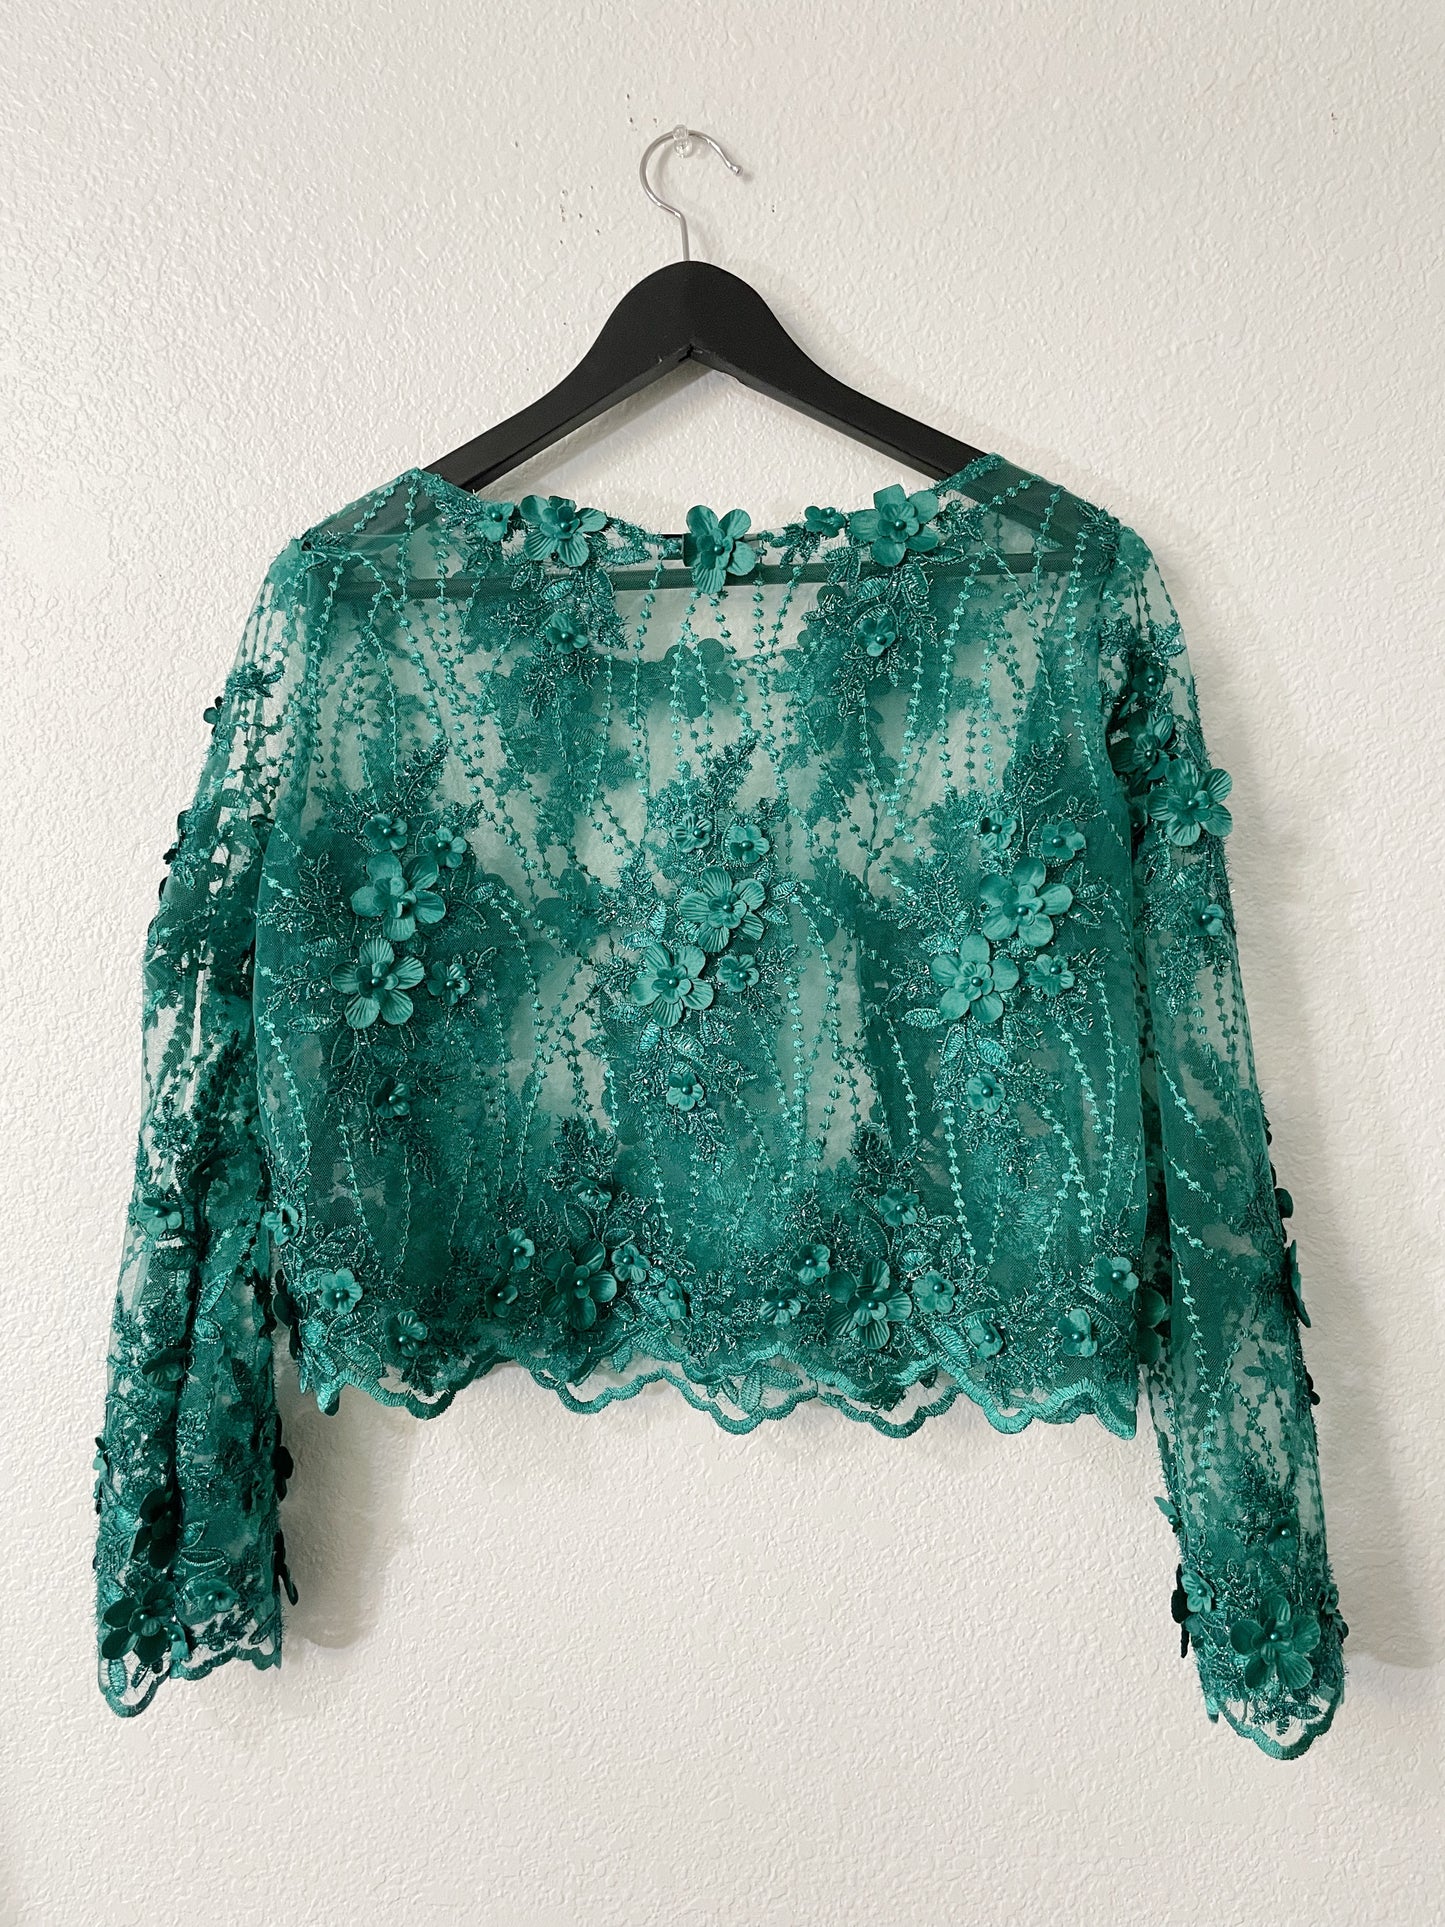 Green Sheer 3D Lace Blouse - Size 8